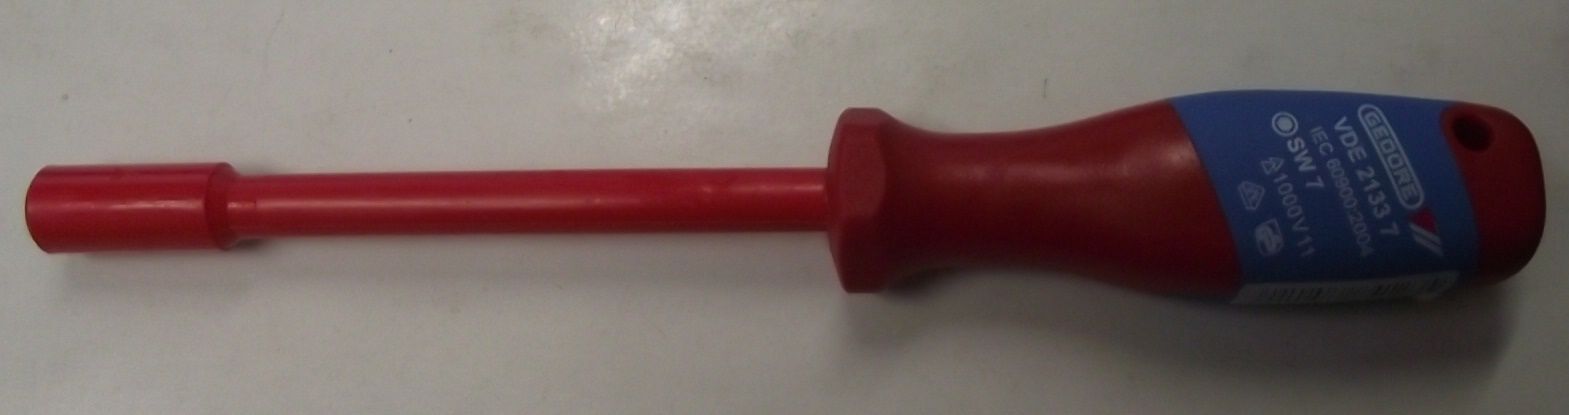 Gedore VDE 2133 7 Vde Insulated Socket Wrench With Handle 7 mm